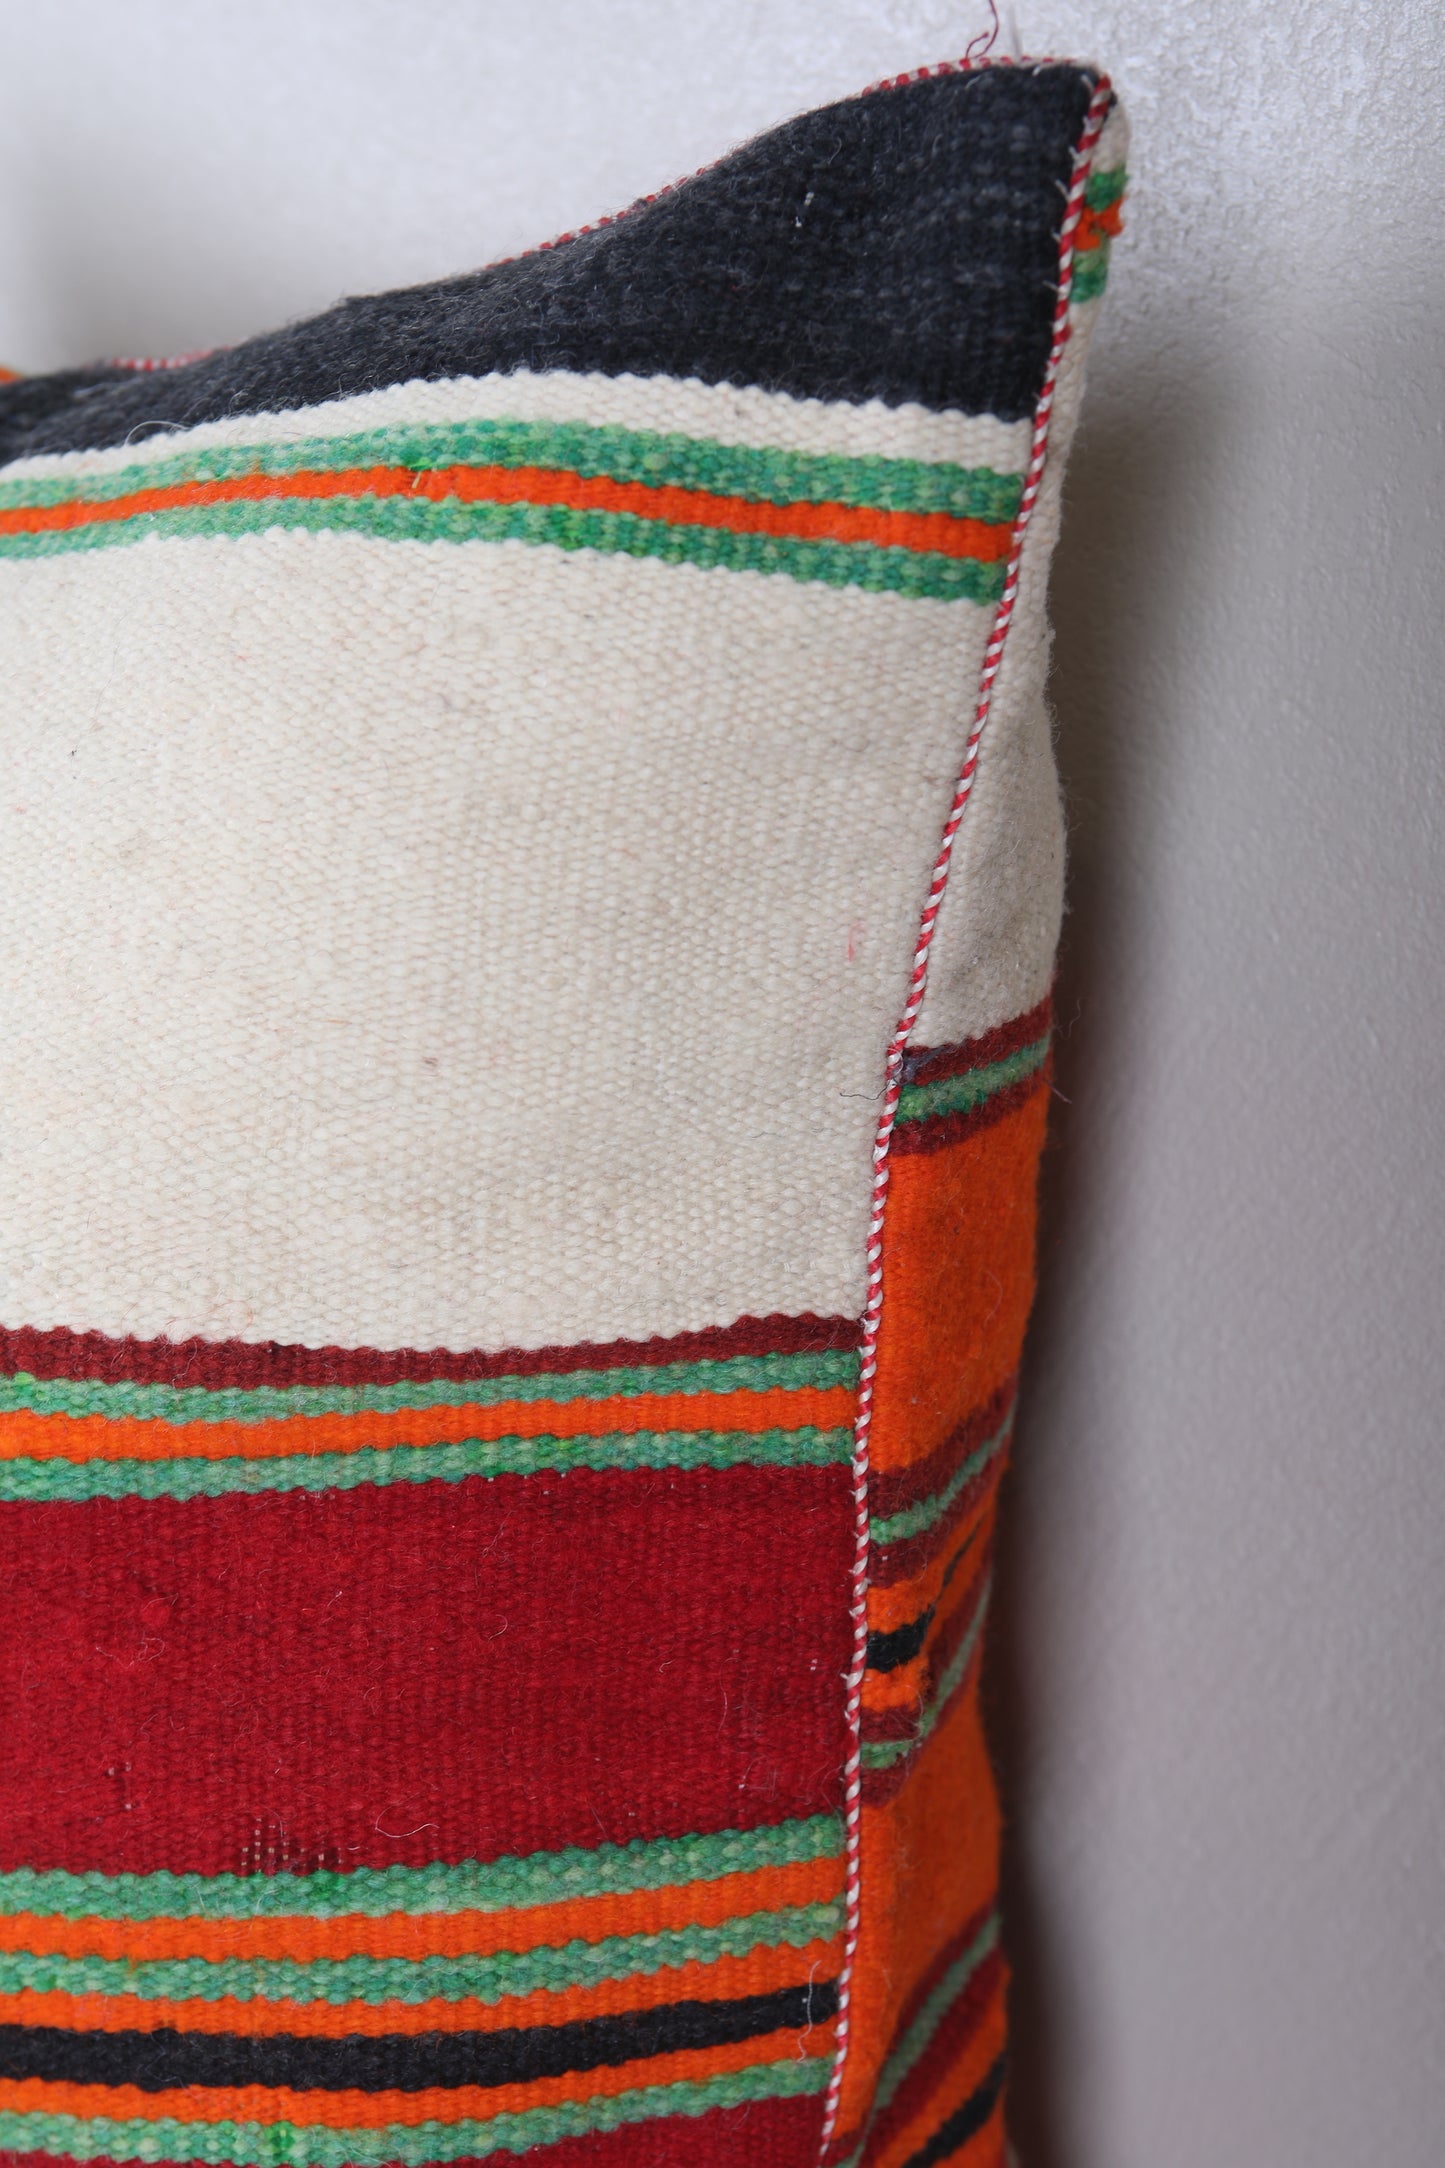 Vintage moroccan handwoven kilim pillow 18.8 INCHES X 21.2 INCHES